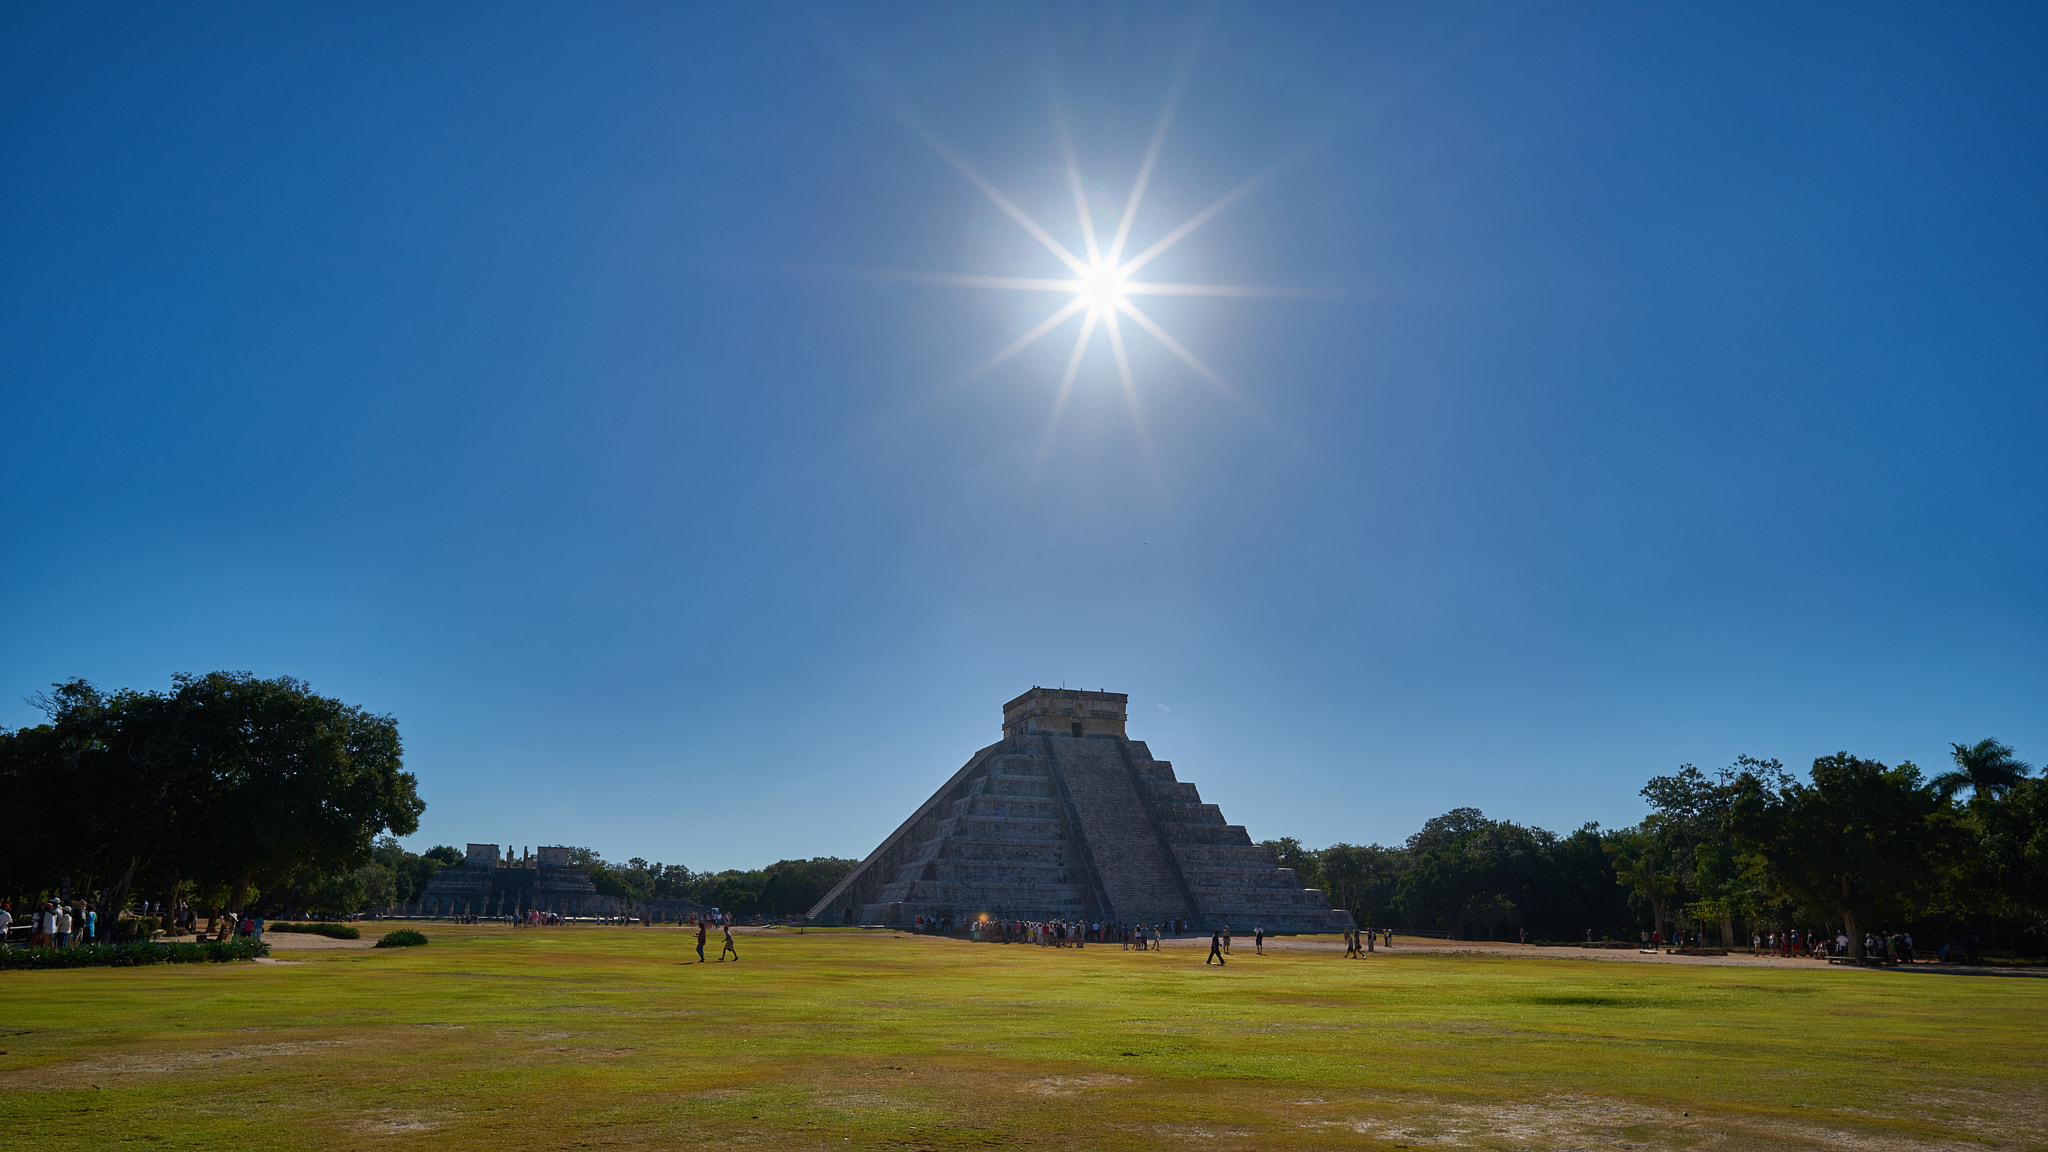 Sony a7R II + ZEISS Loxia 21mm F2.8 sample photo. Sunstar over chichen itza photography